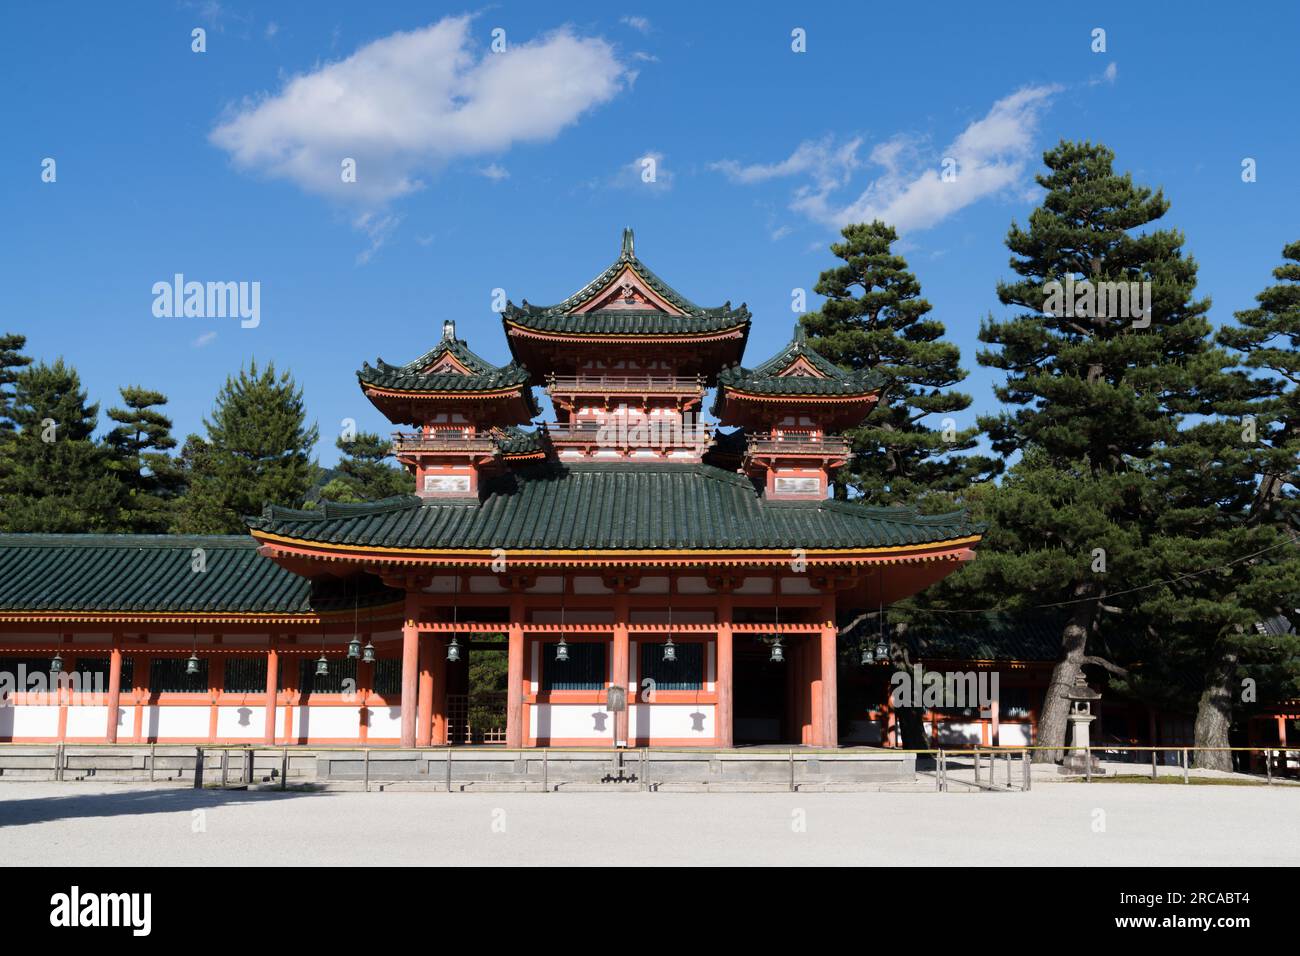 Traditional temple landmark building at Heian Jingu shinto or buddhist religious shrine seen in Kyoto Japan on a luxury holiday as a tourist Stock Photo